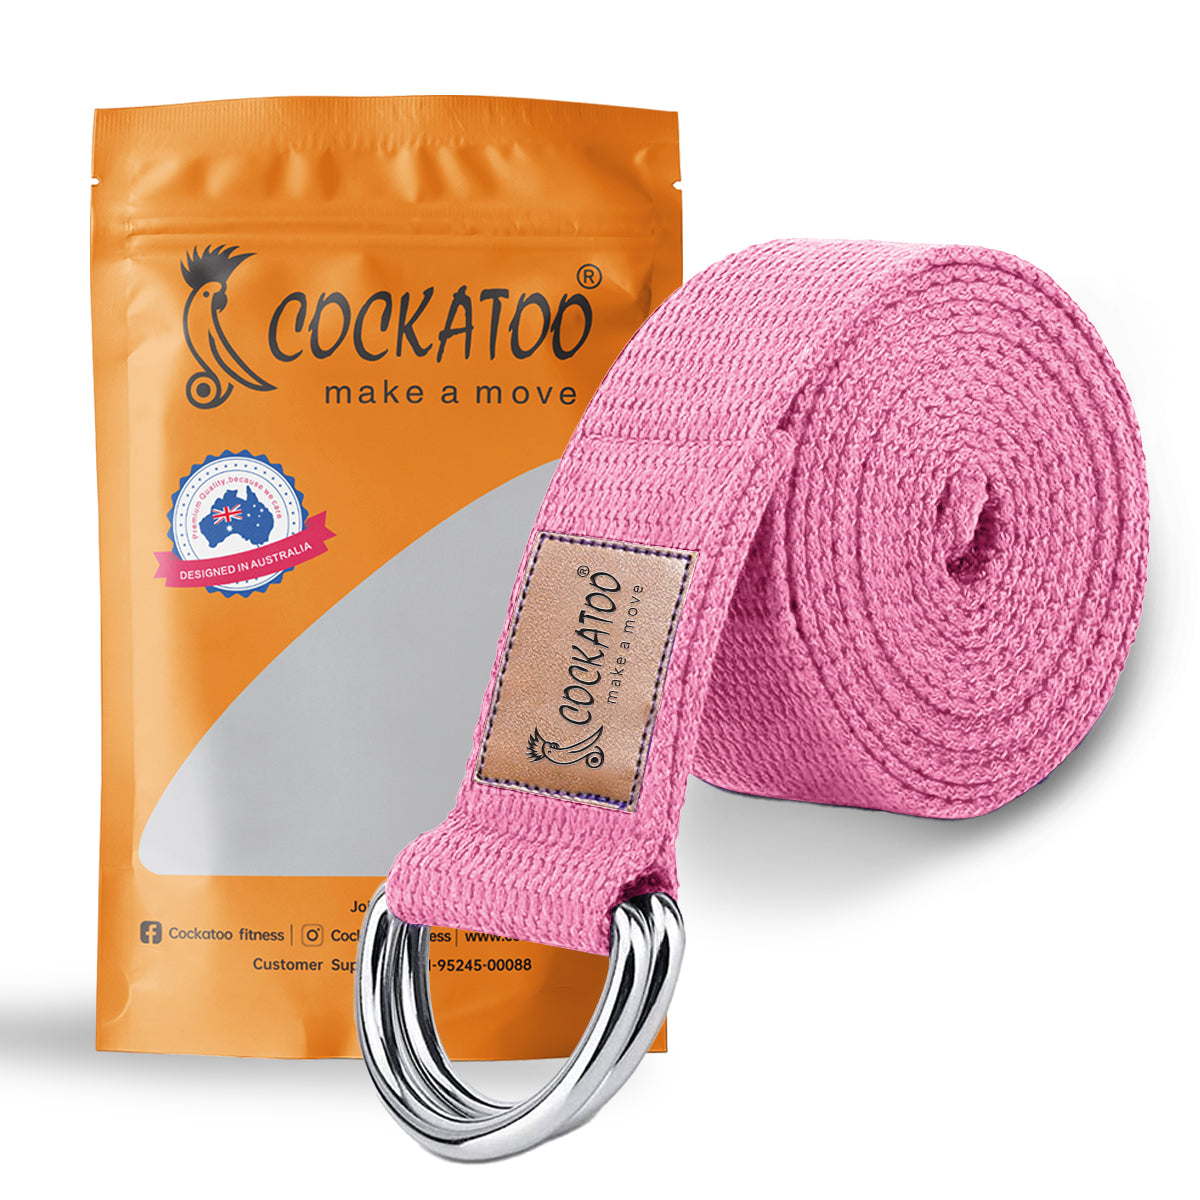 Cockatoo Yoga Belt for Women and Men - Yoga Strap for Stretching with Extra Safe Adjustable D-Ring Buckle - Durable and Comfy Texture - Perfect for Your Yoga Session